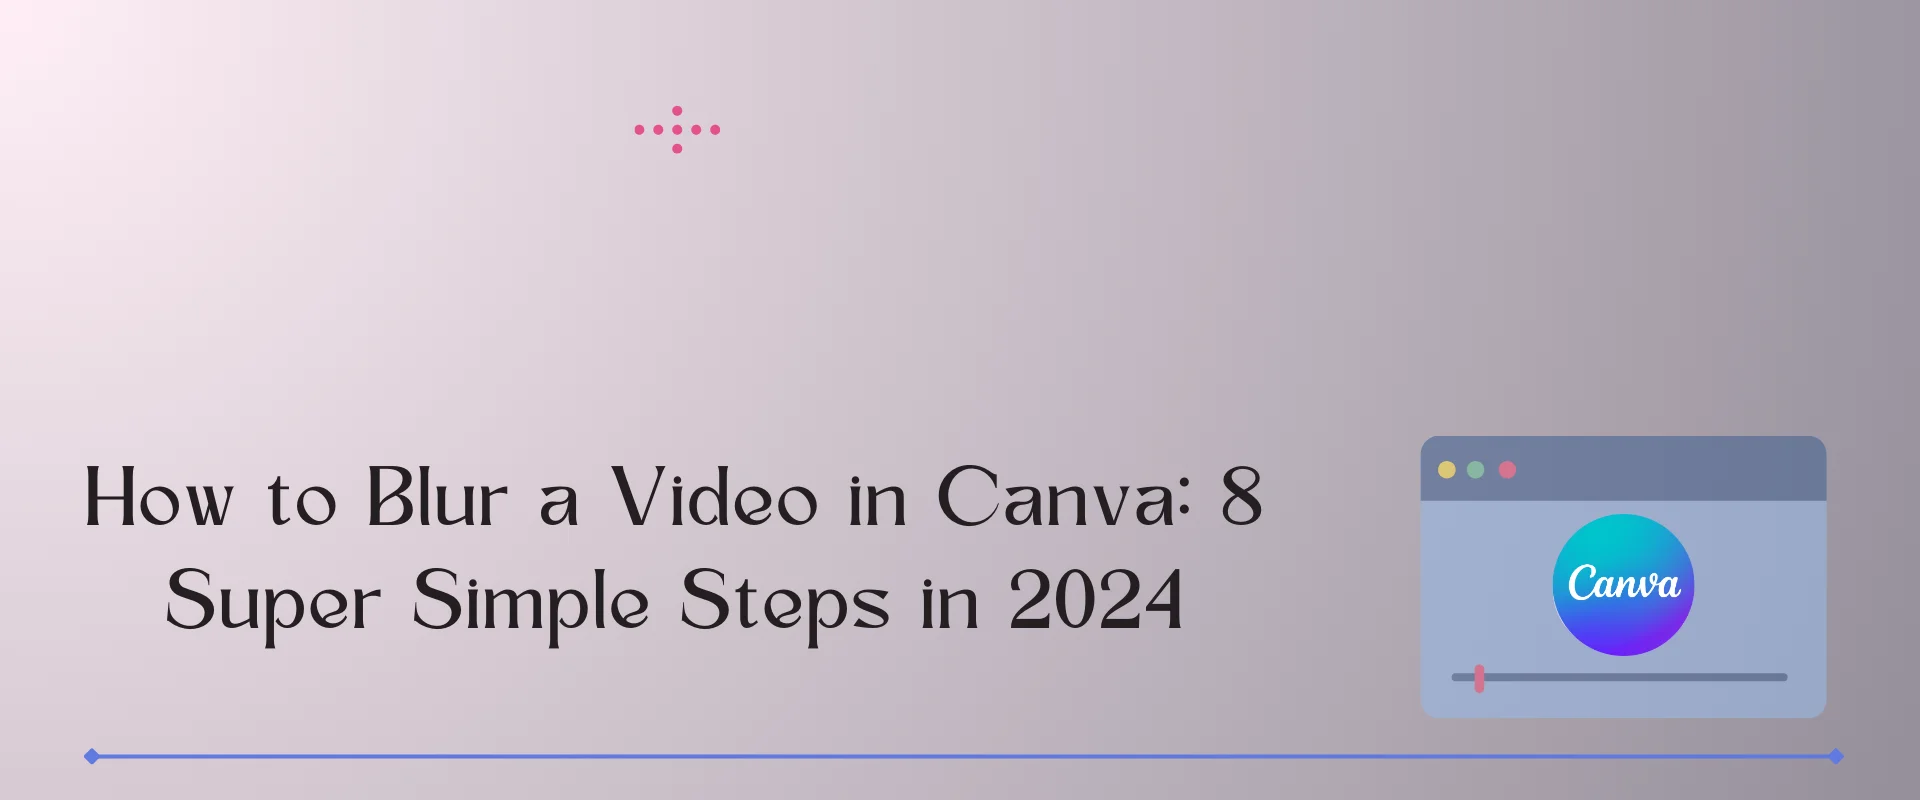 How to Blur a Video in Canva: 8 Super Simple Steps